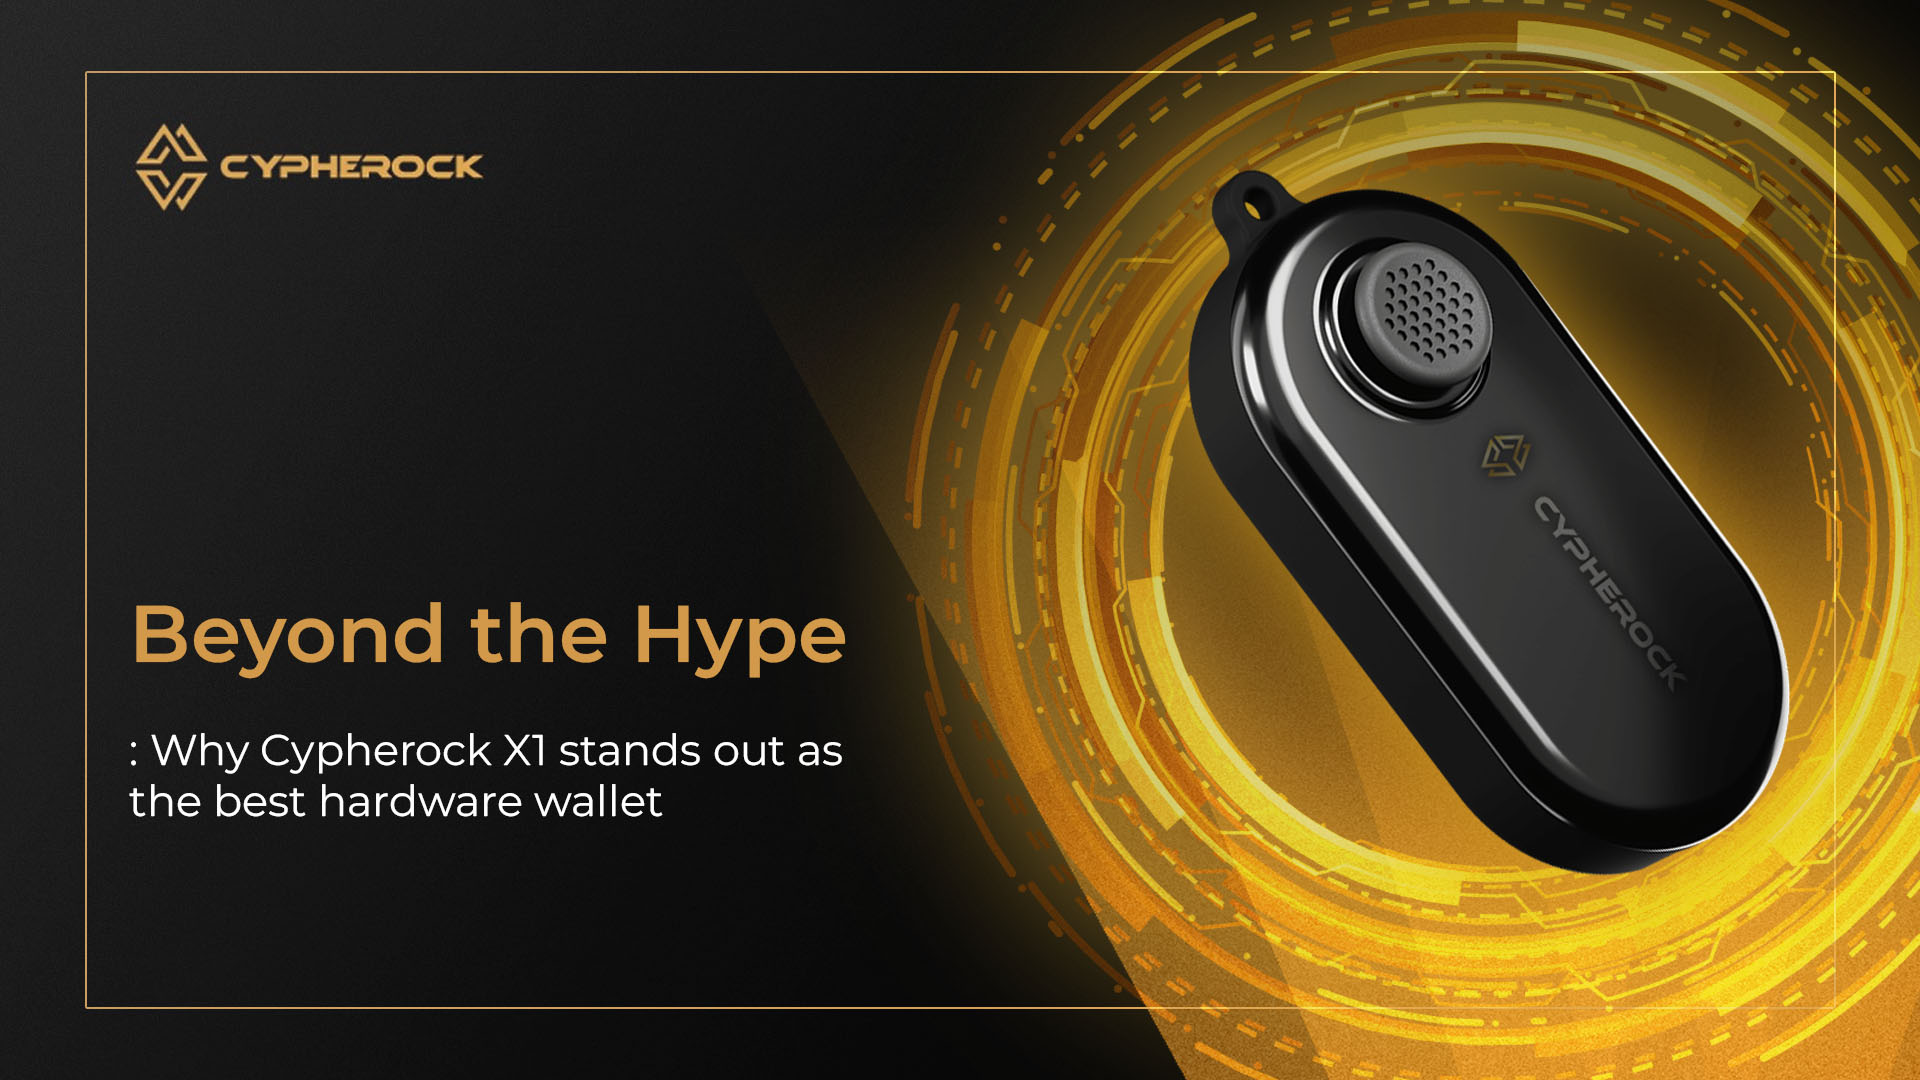 Beyond the Hype: Why Cypherock X1 Stands Out as the Best Hardware Wallet